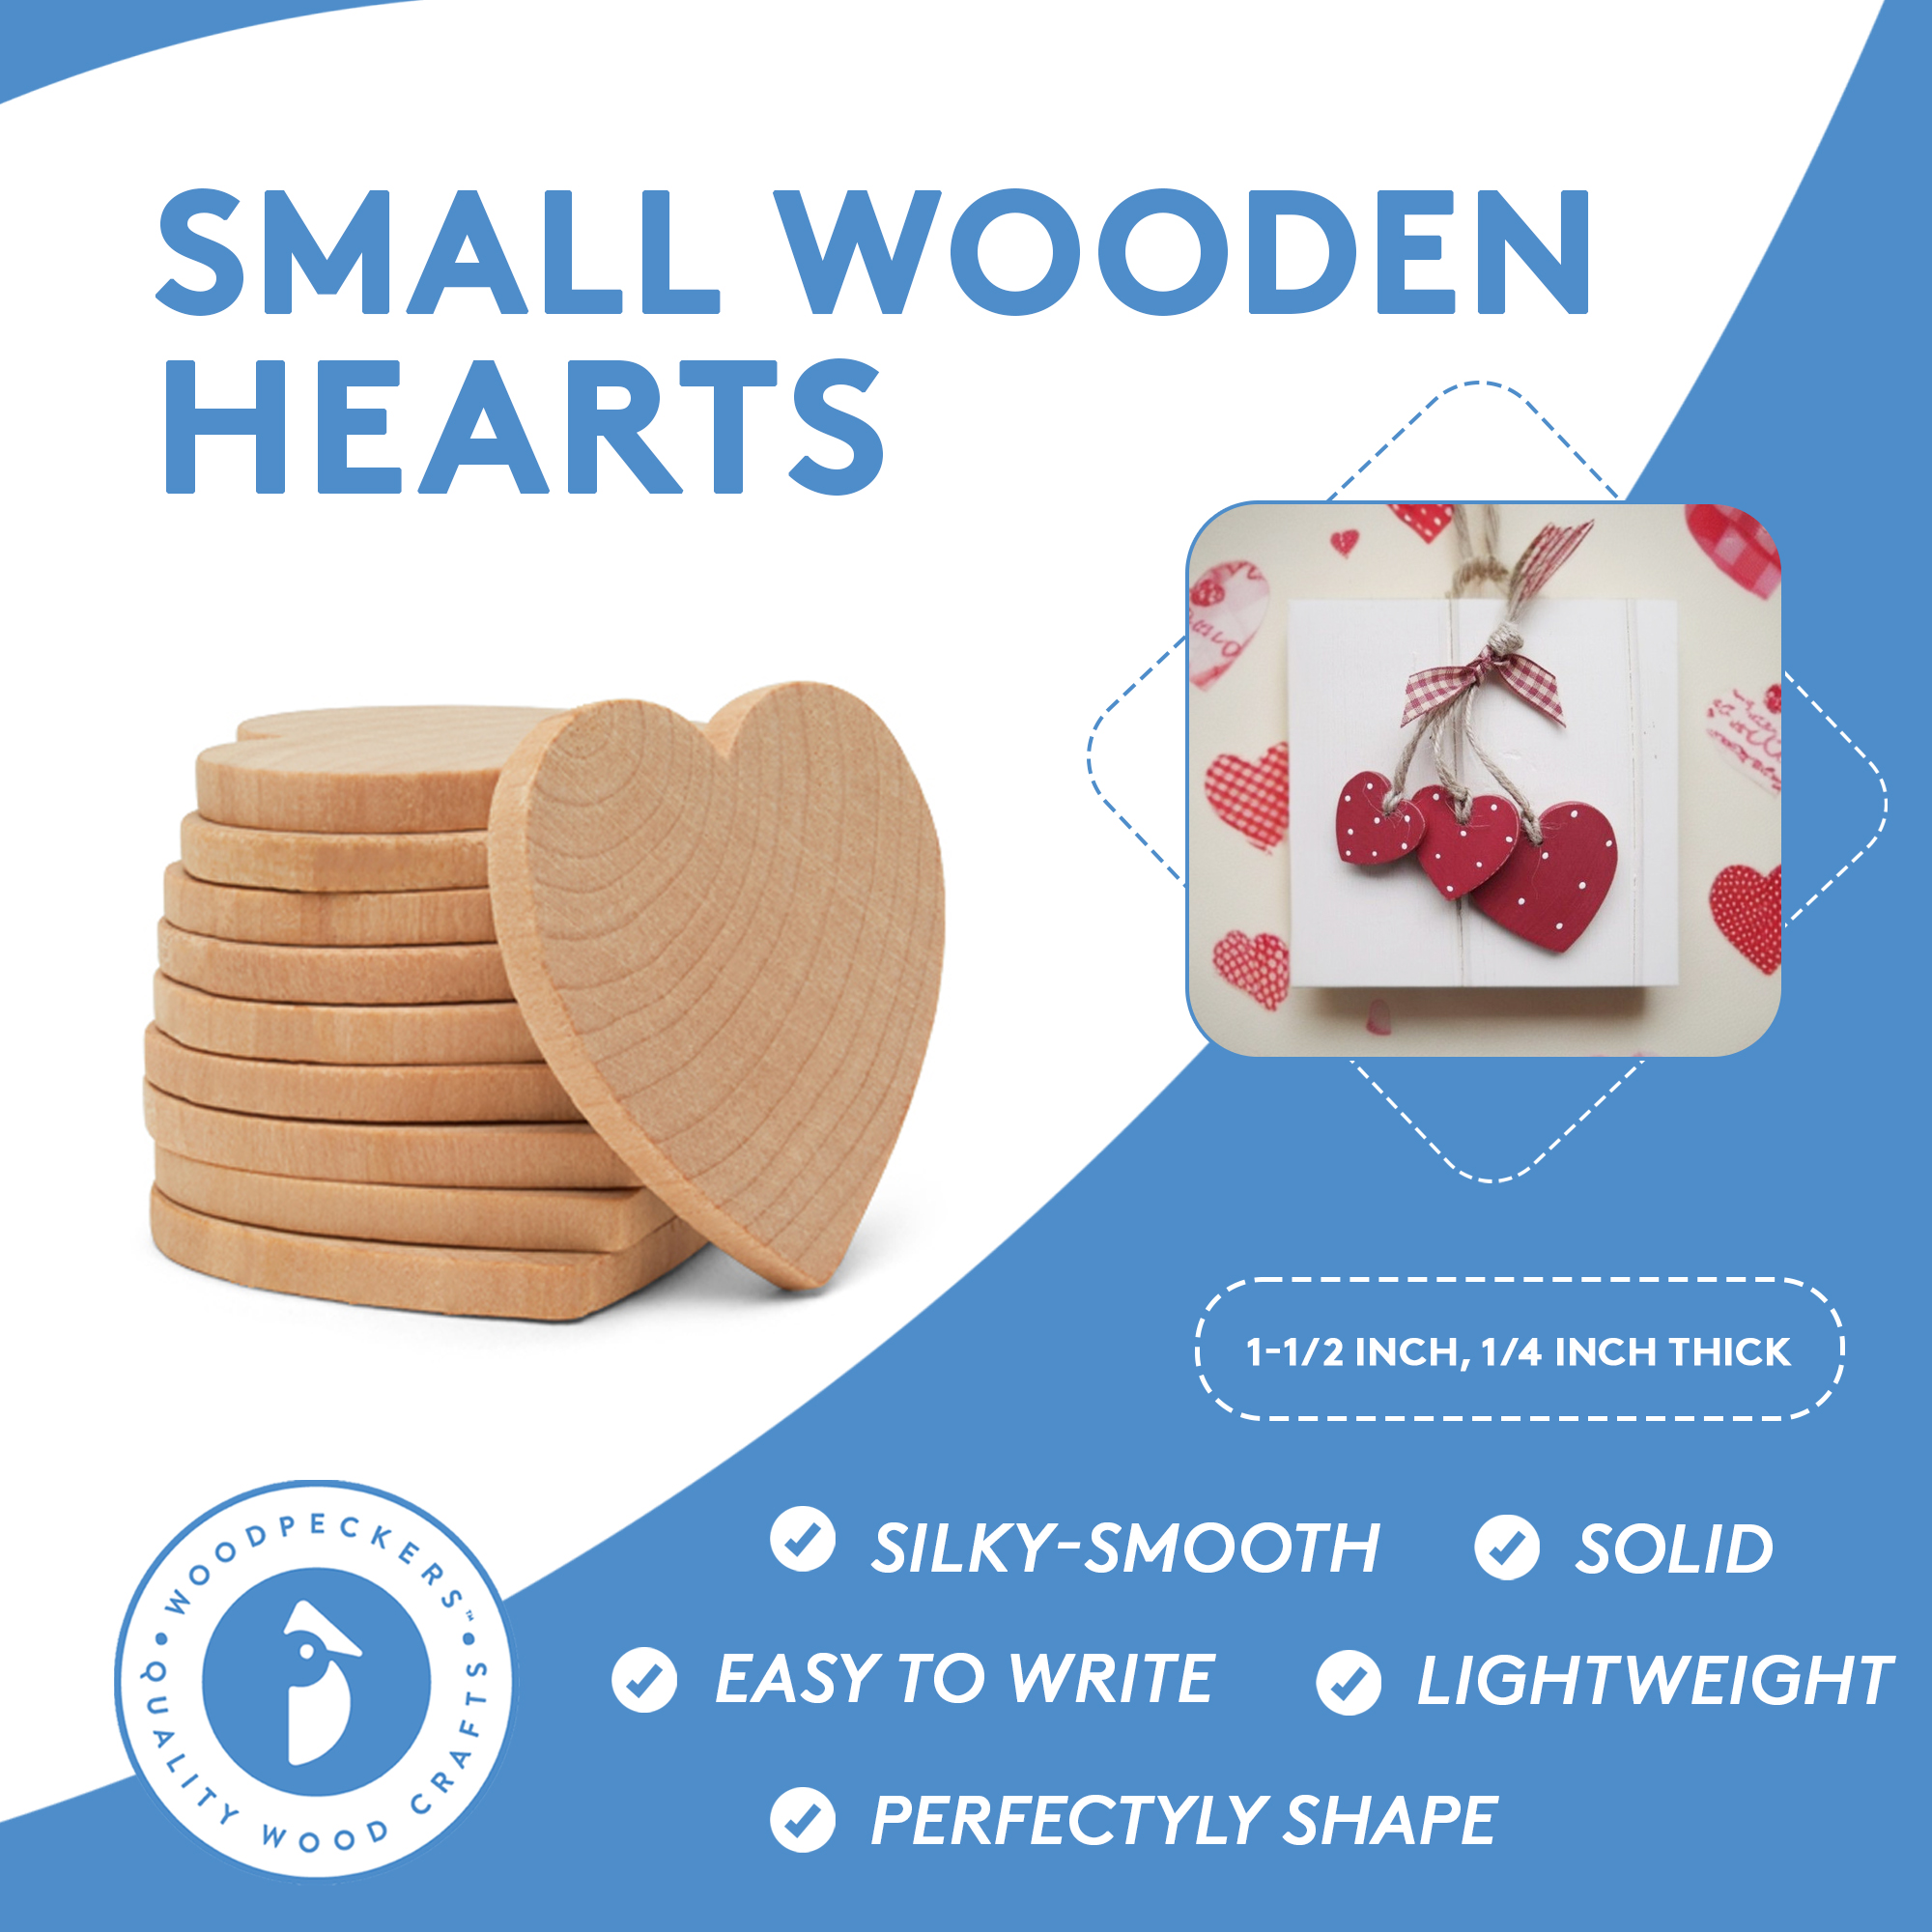 100 Small Wooden Hearts for Crafts 1-1/2 inch, 1/4 inch Thick, Hearts for  Country Wedding Table Decor/ Guestbooks, by Woodpeckers 